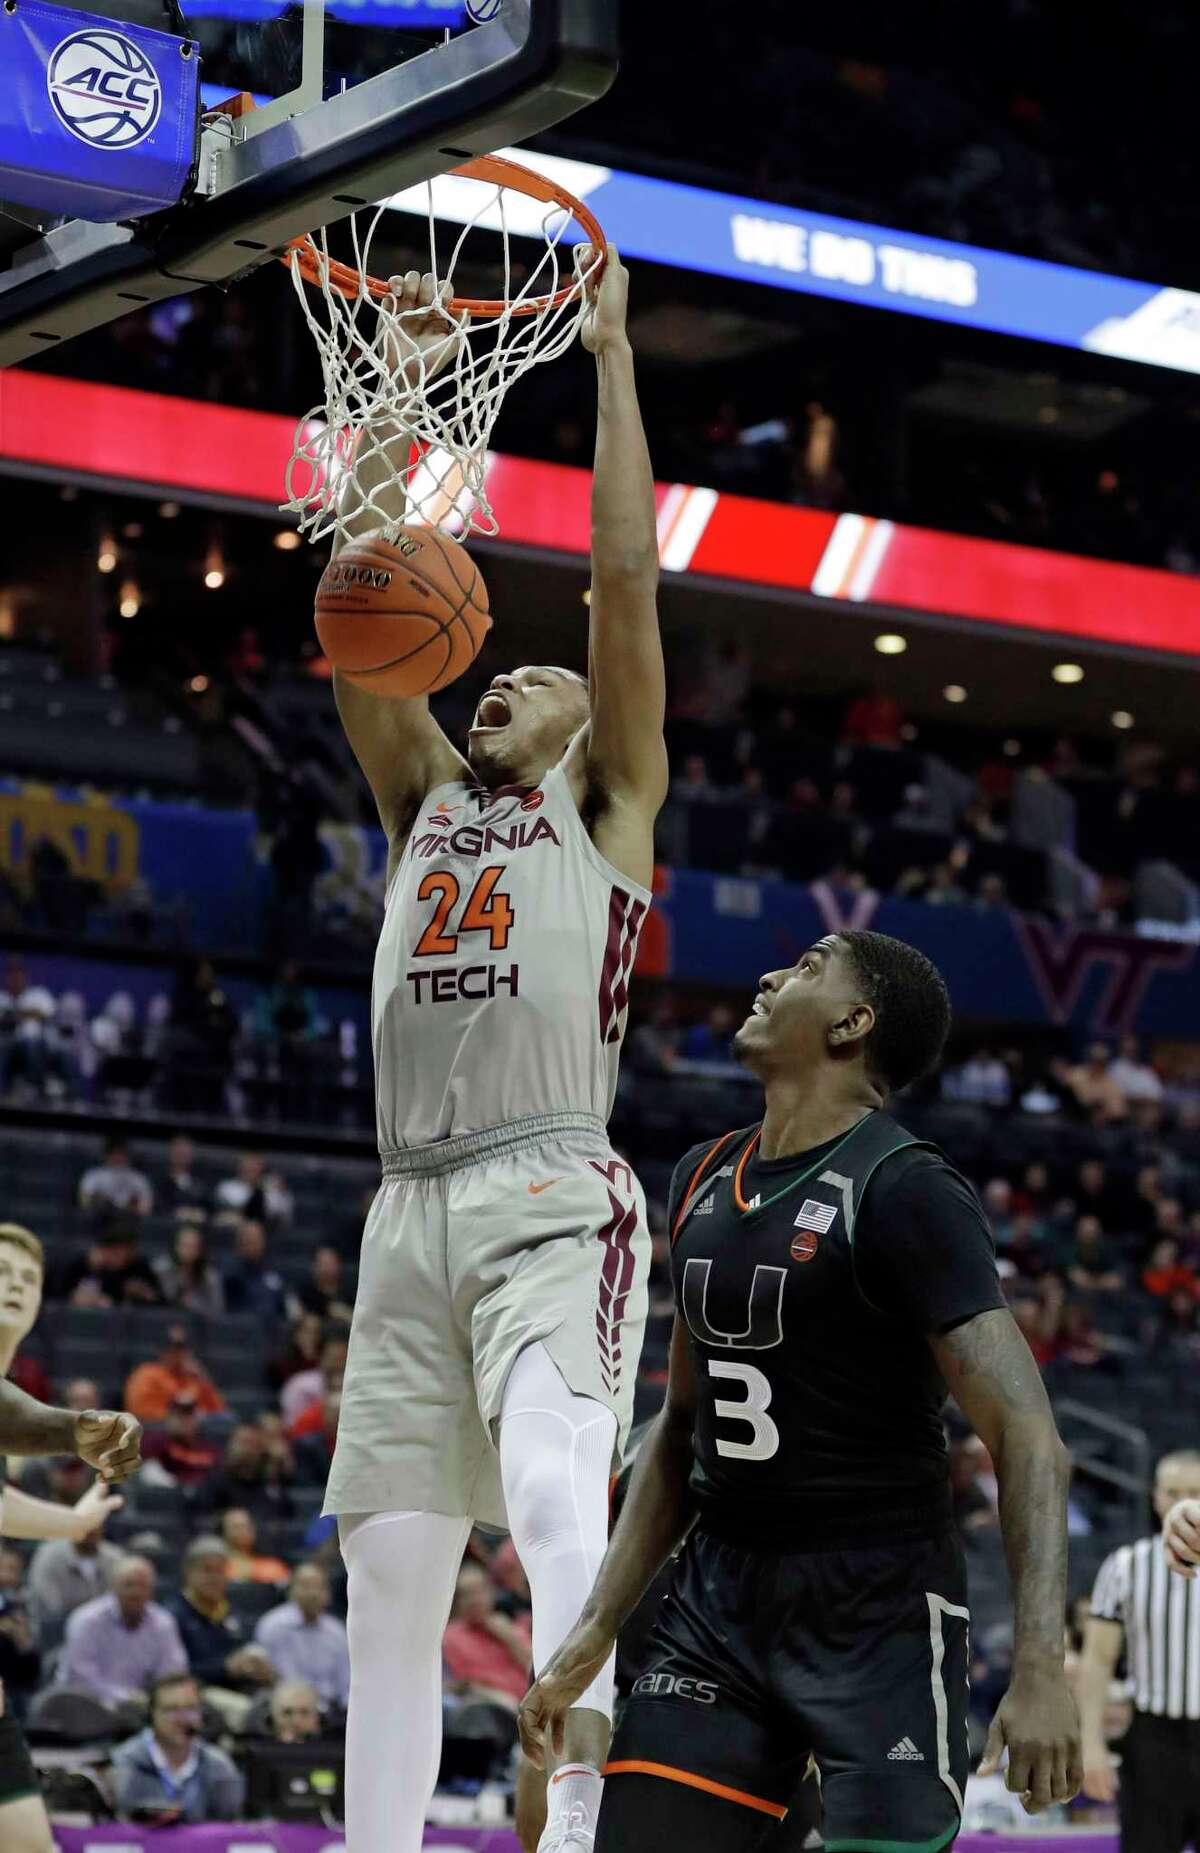 Virginia Tech's Kerry Blackshear Jr. (24) dunks past Miami's Anthony Lawrence II (3) during the second half of an NCAA college basketball game in the Atlantic Coast Conference tournament in Charlotte, N.C., Wednesday, March 13, 2019. (AP Photo/Nell Redmond)